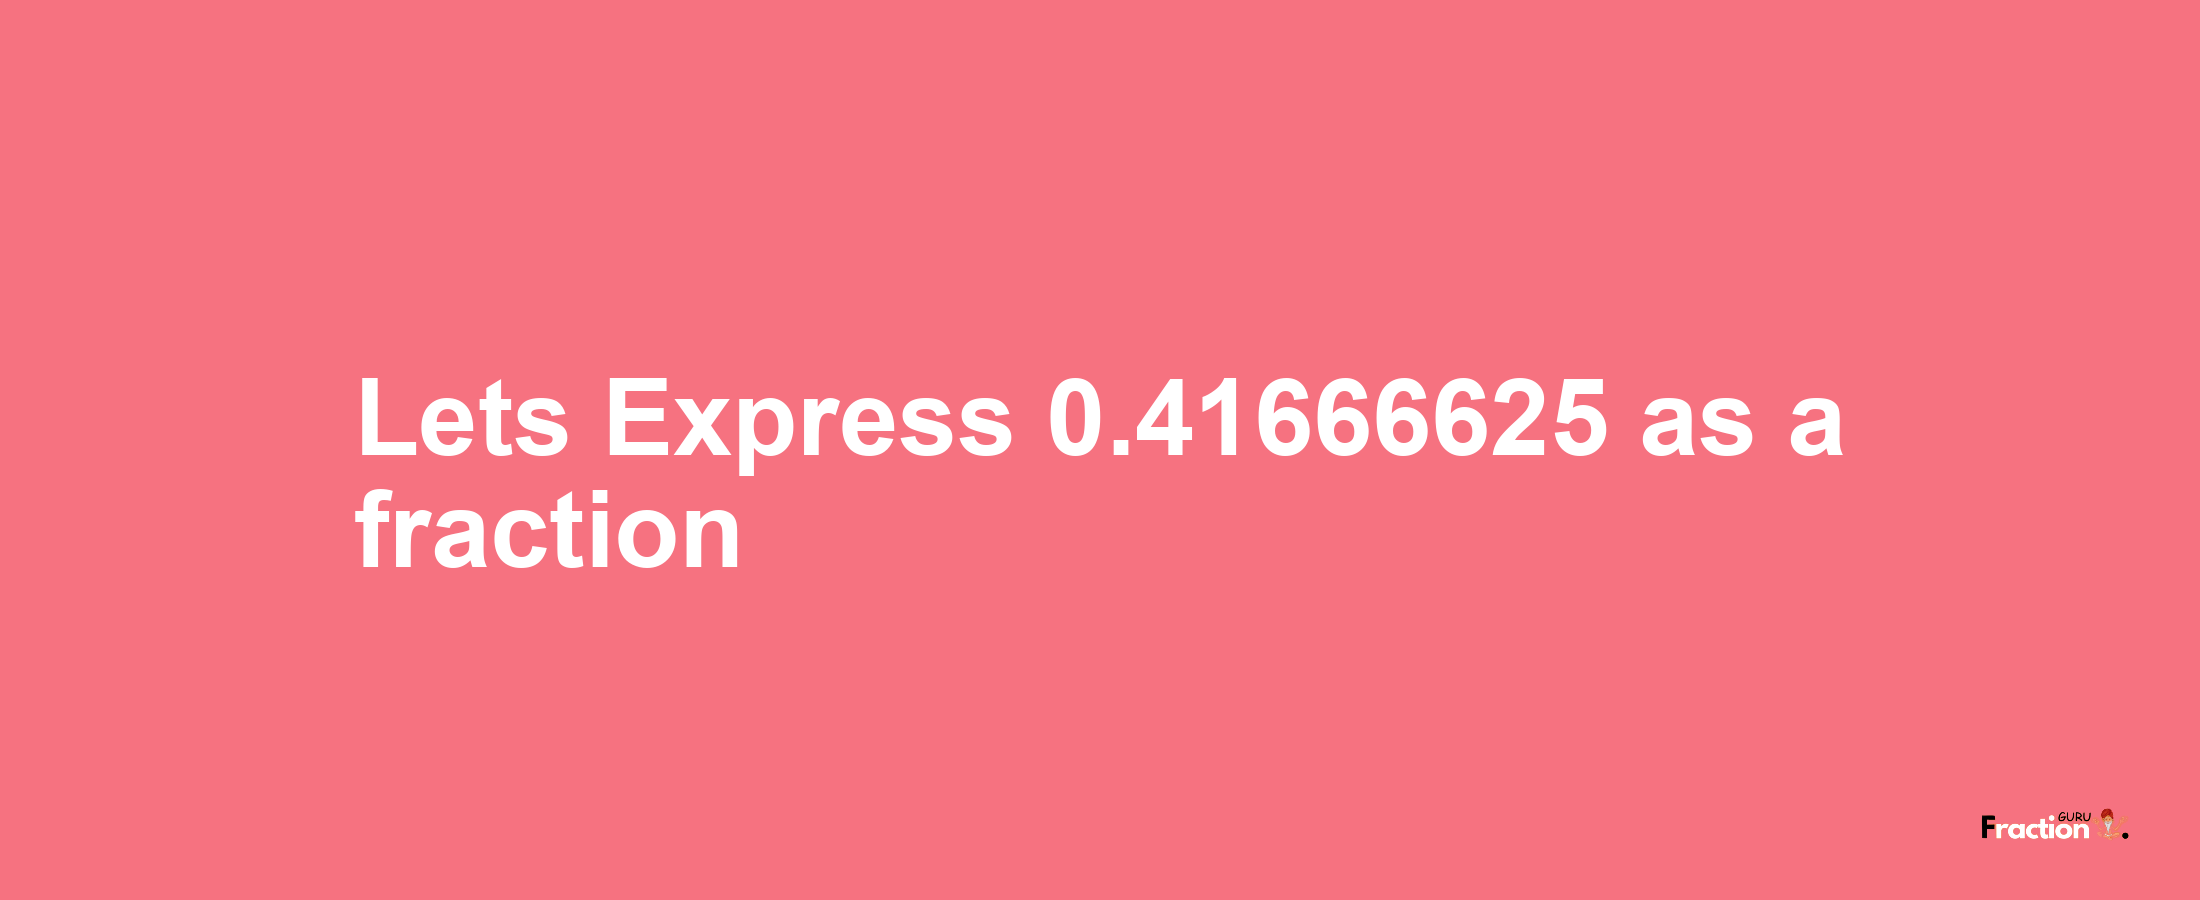 Lets Express 0.41666625 as afraction